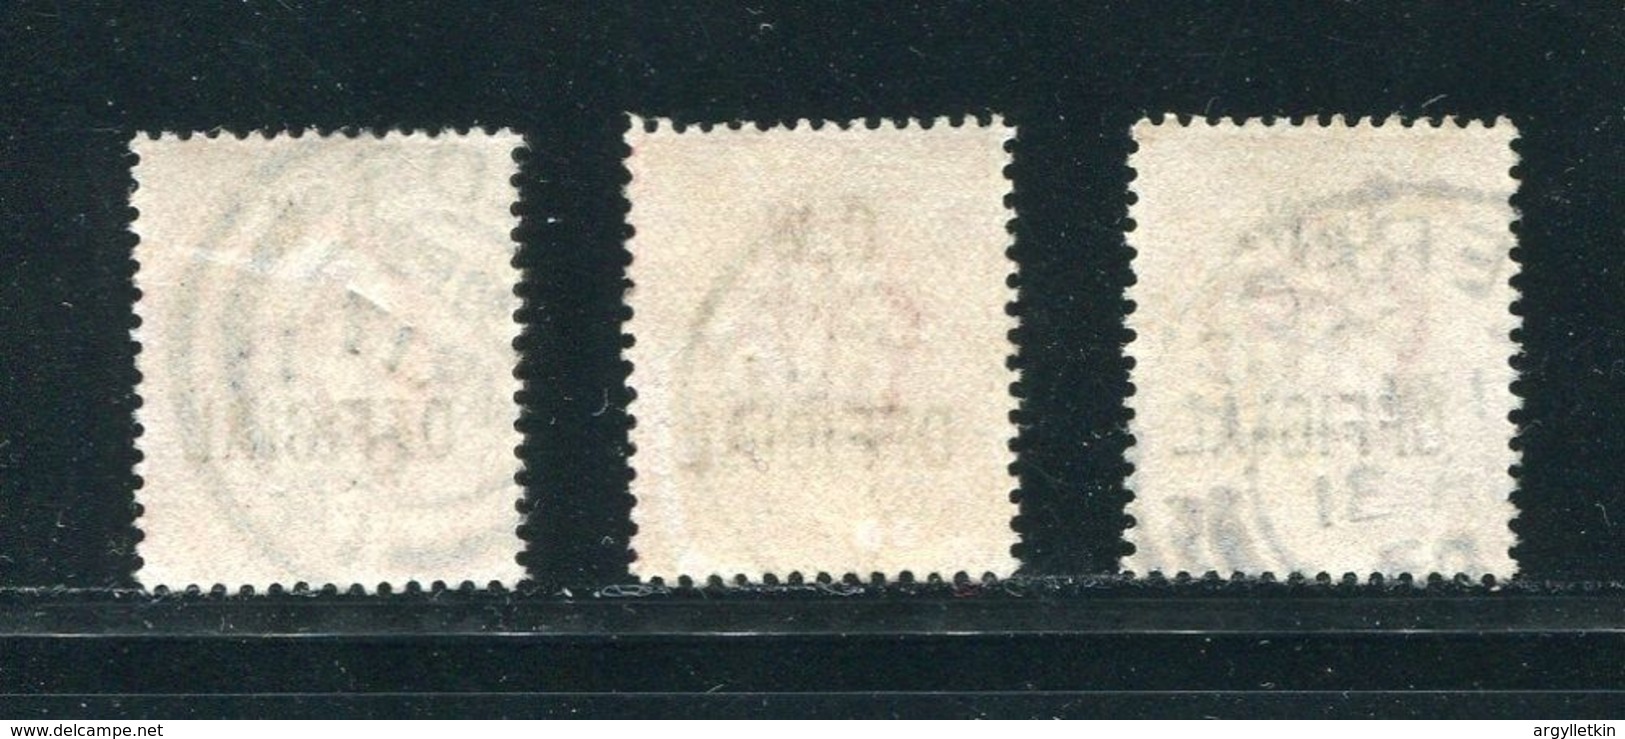 GB KING EDWARD 7TH OFFICIAL STAMPS O.W. OFFICIAL LEEDS LIVERPOOL - Non Classés